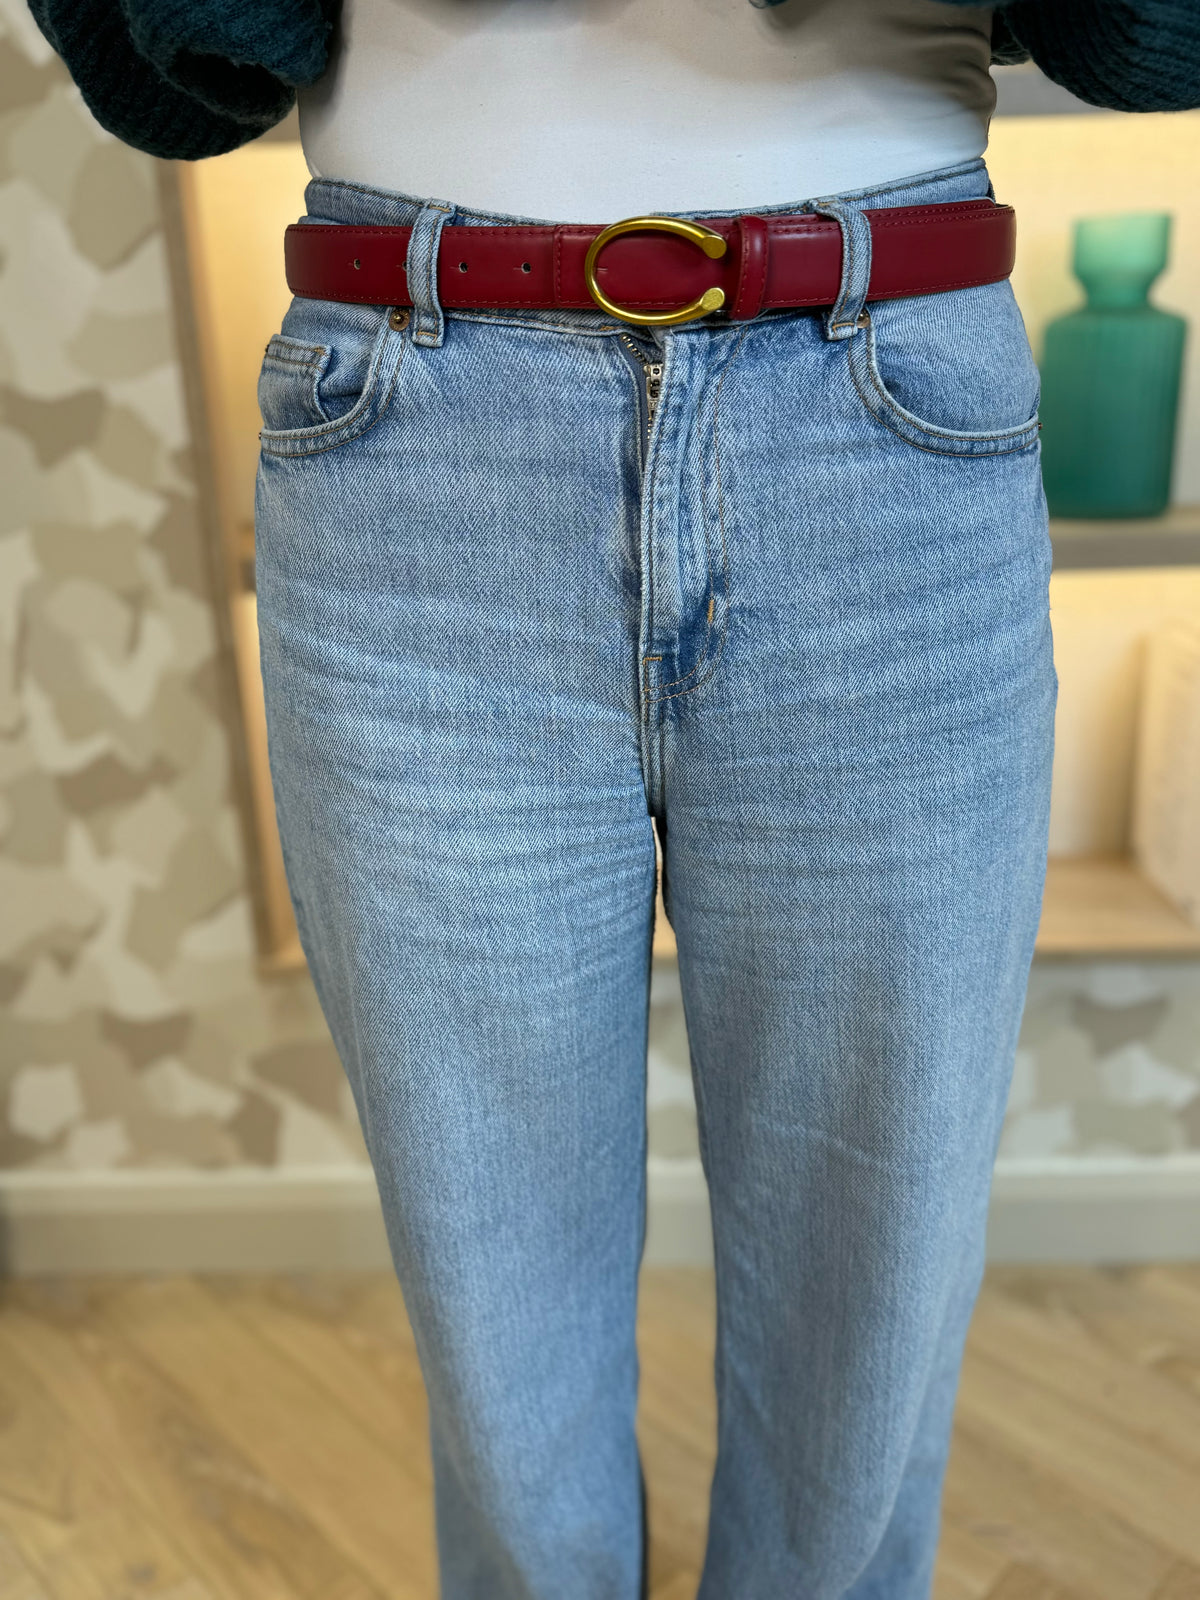 Polly Open End Buckle Belt In Red